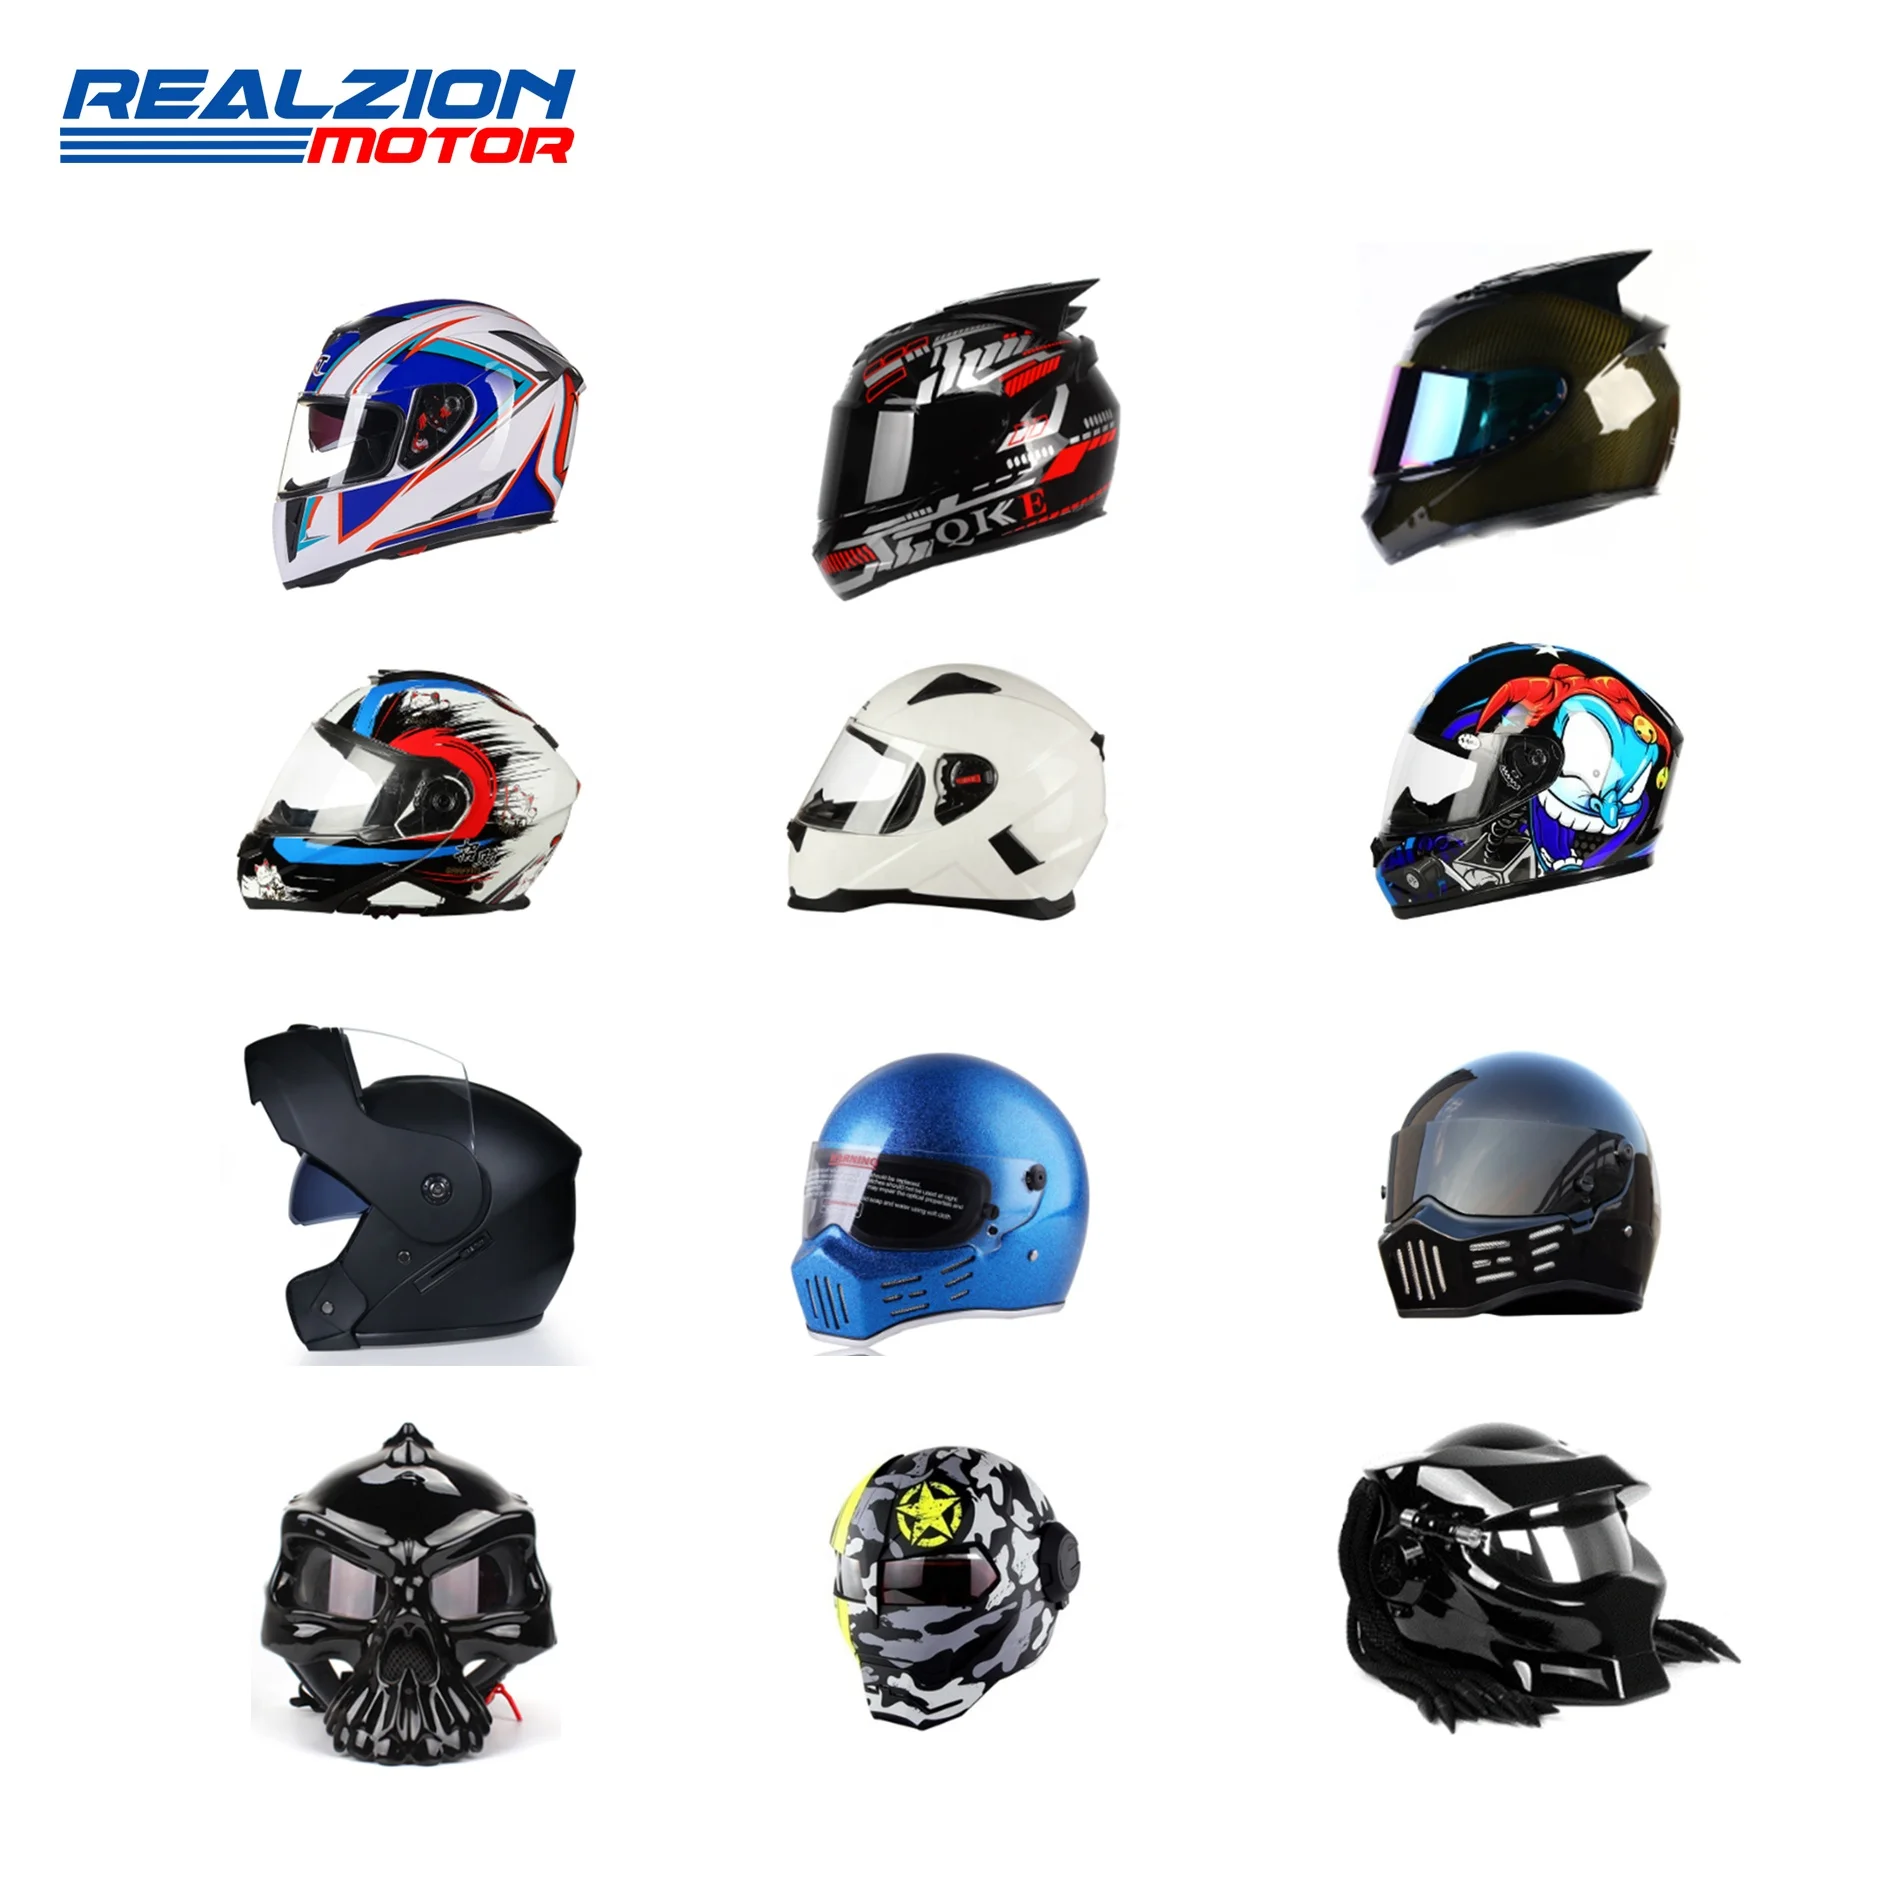 

REALZION Motorcycle Racing DOT ECE Certification M L XL XXL XXXL Size ABS Material Carbon Fiber Full Face Helmet For Universal, For different colors